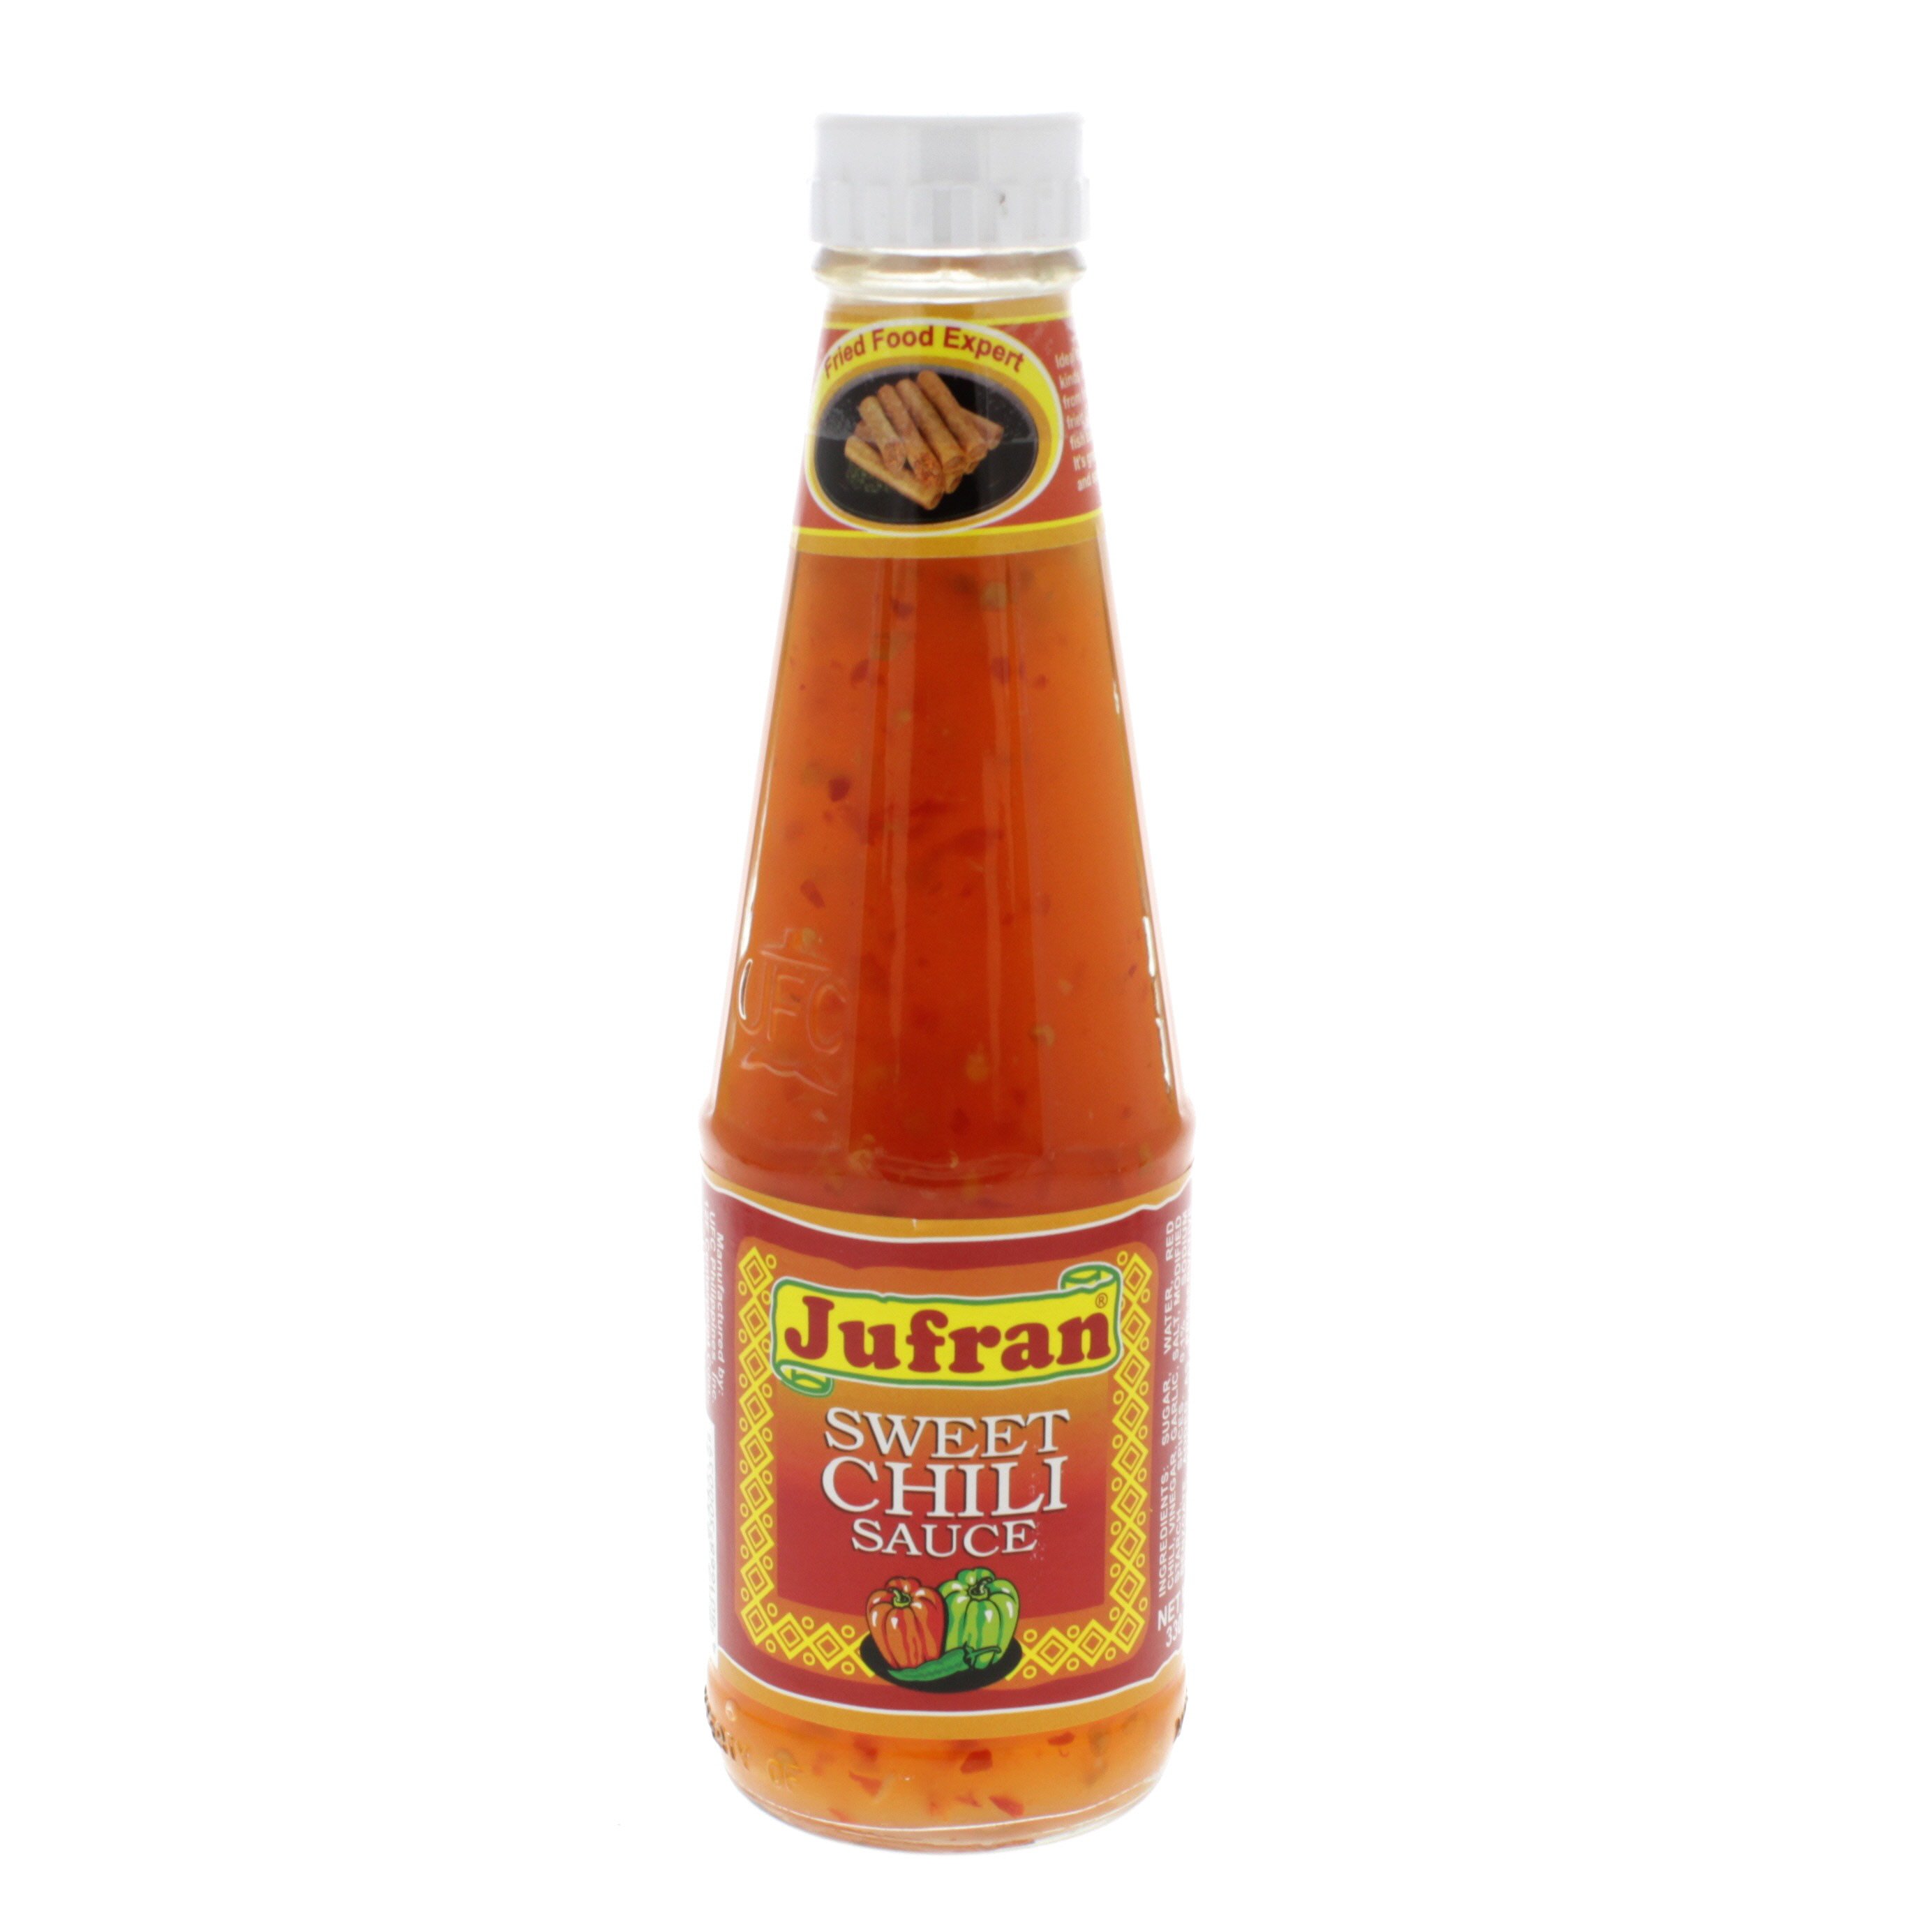 Jufran Sweet Chili Sauce Shop Specialty Sauces At H E B,Cooking Ribs On The Grill In Foil